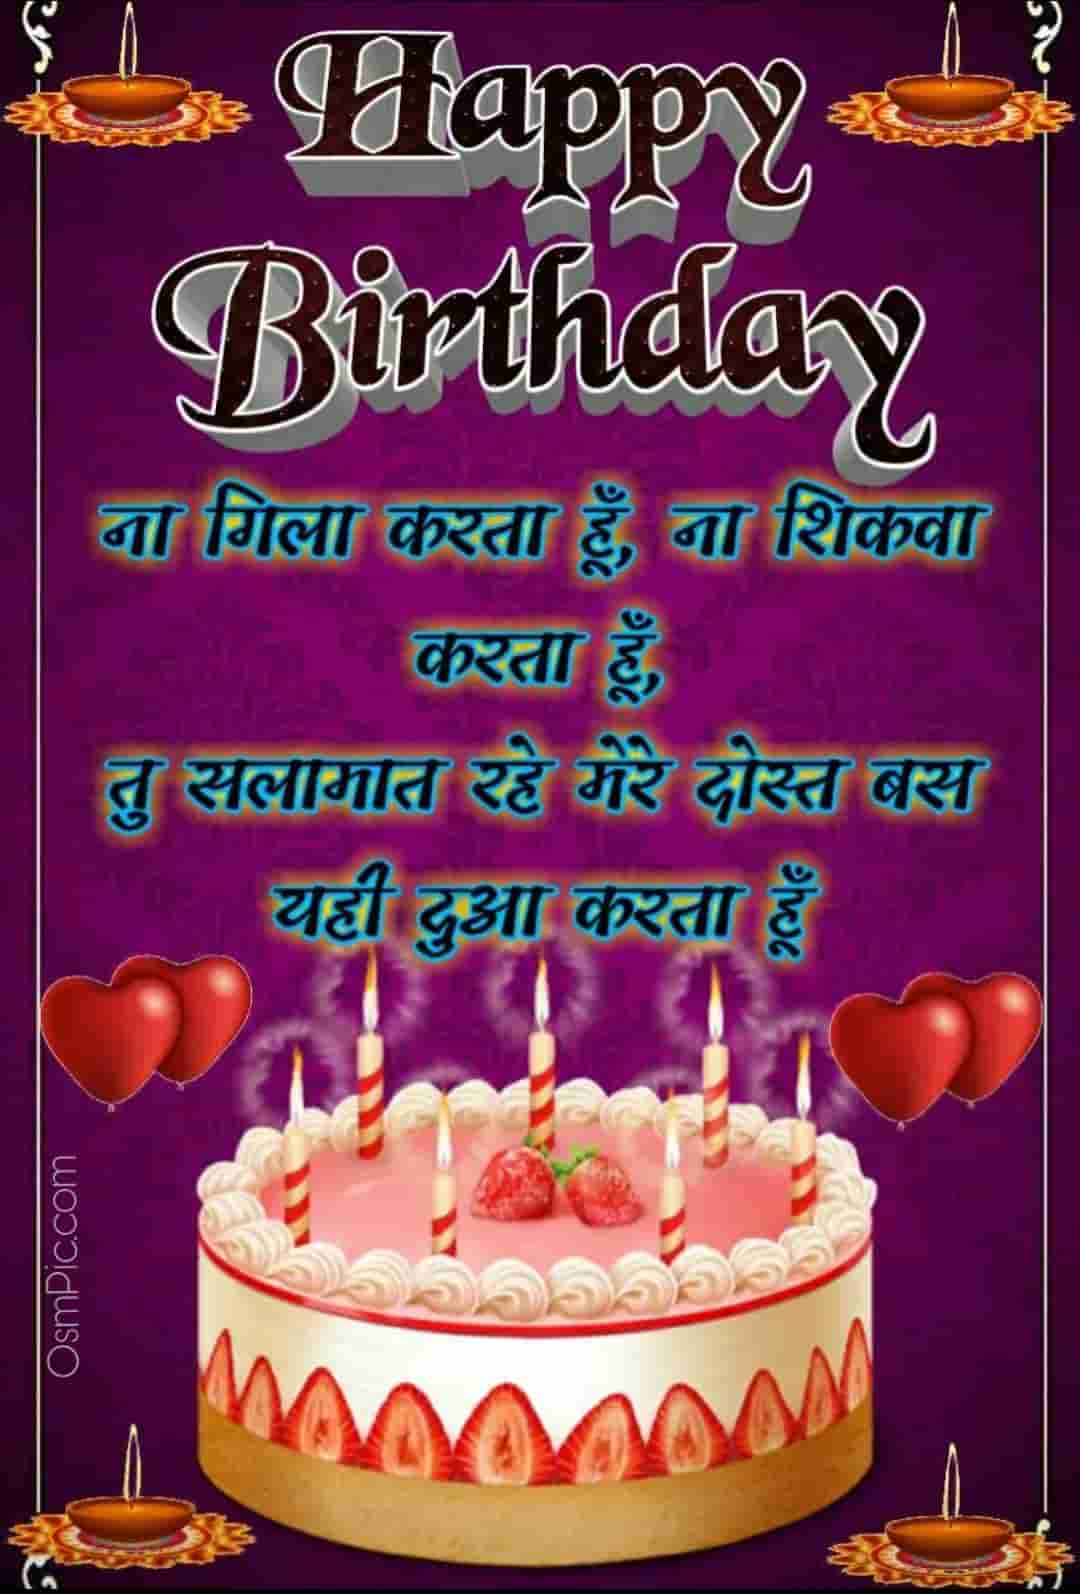 Happy Birthday Wishes For Friend In Hindi